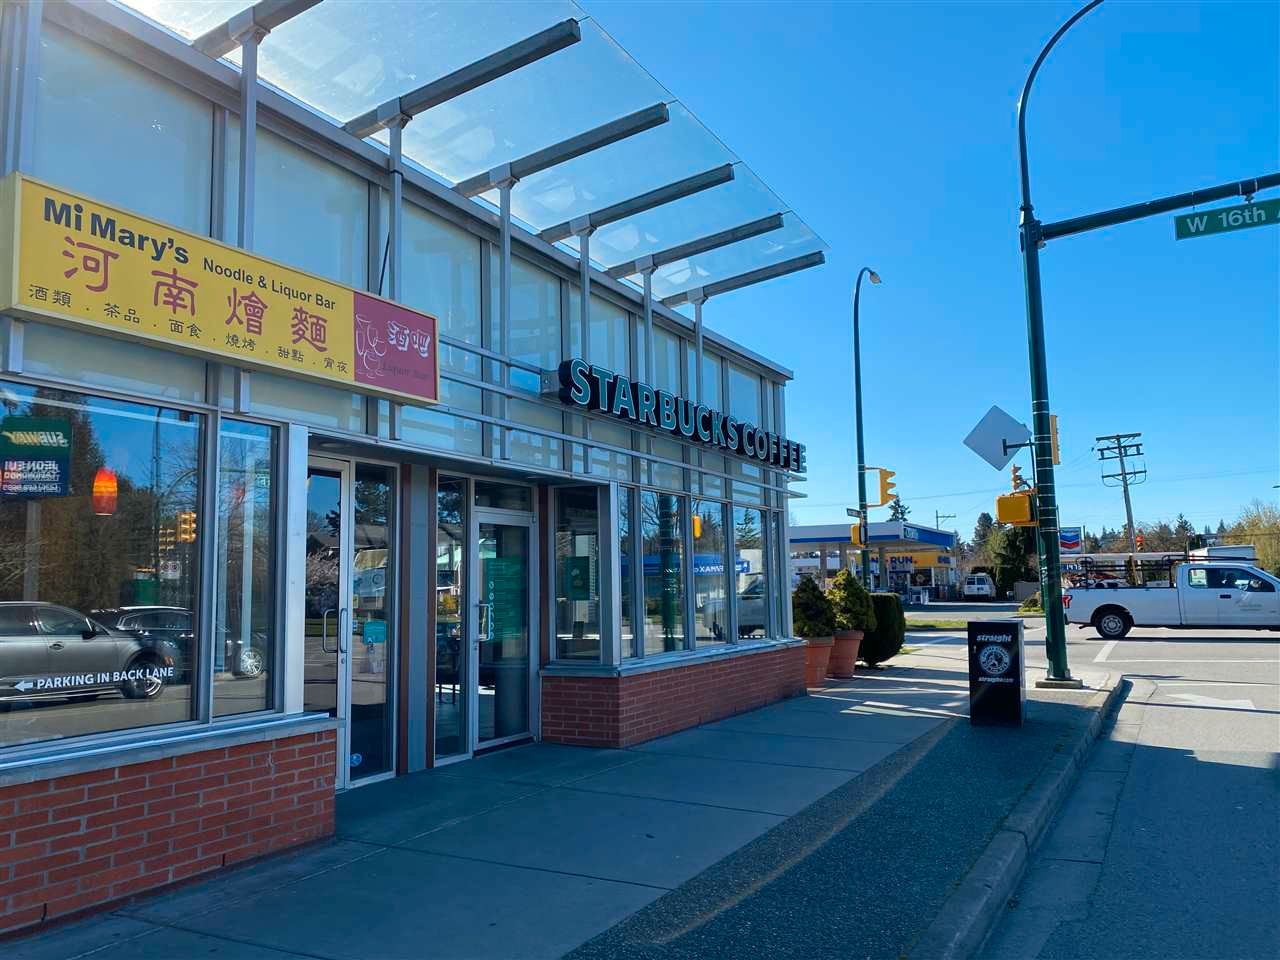 Main Photo: 3188 MACDONALD in Vancouver: Kitsilano Business for sale (Vancouver West)  : MLS®# C8037708